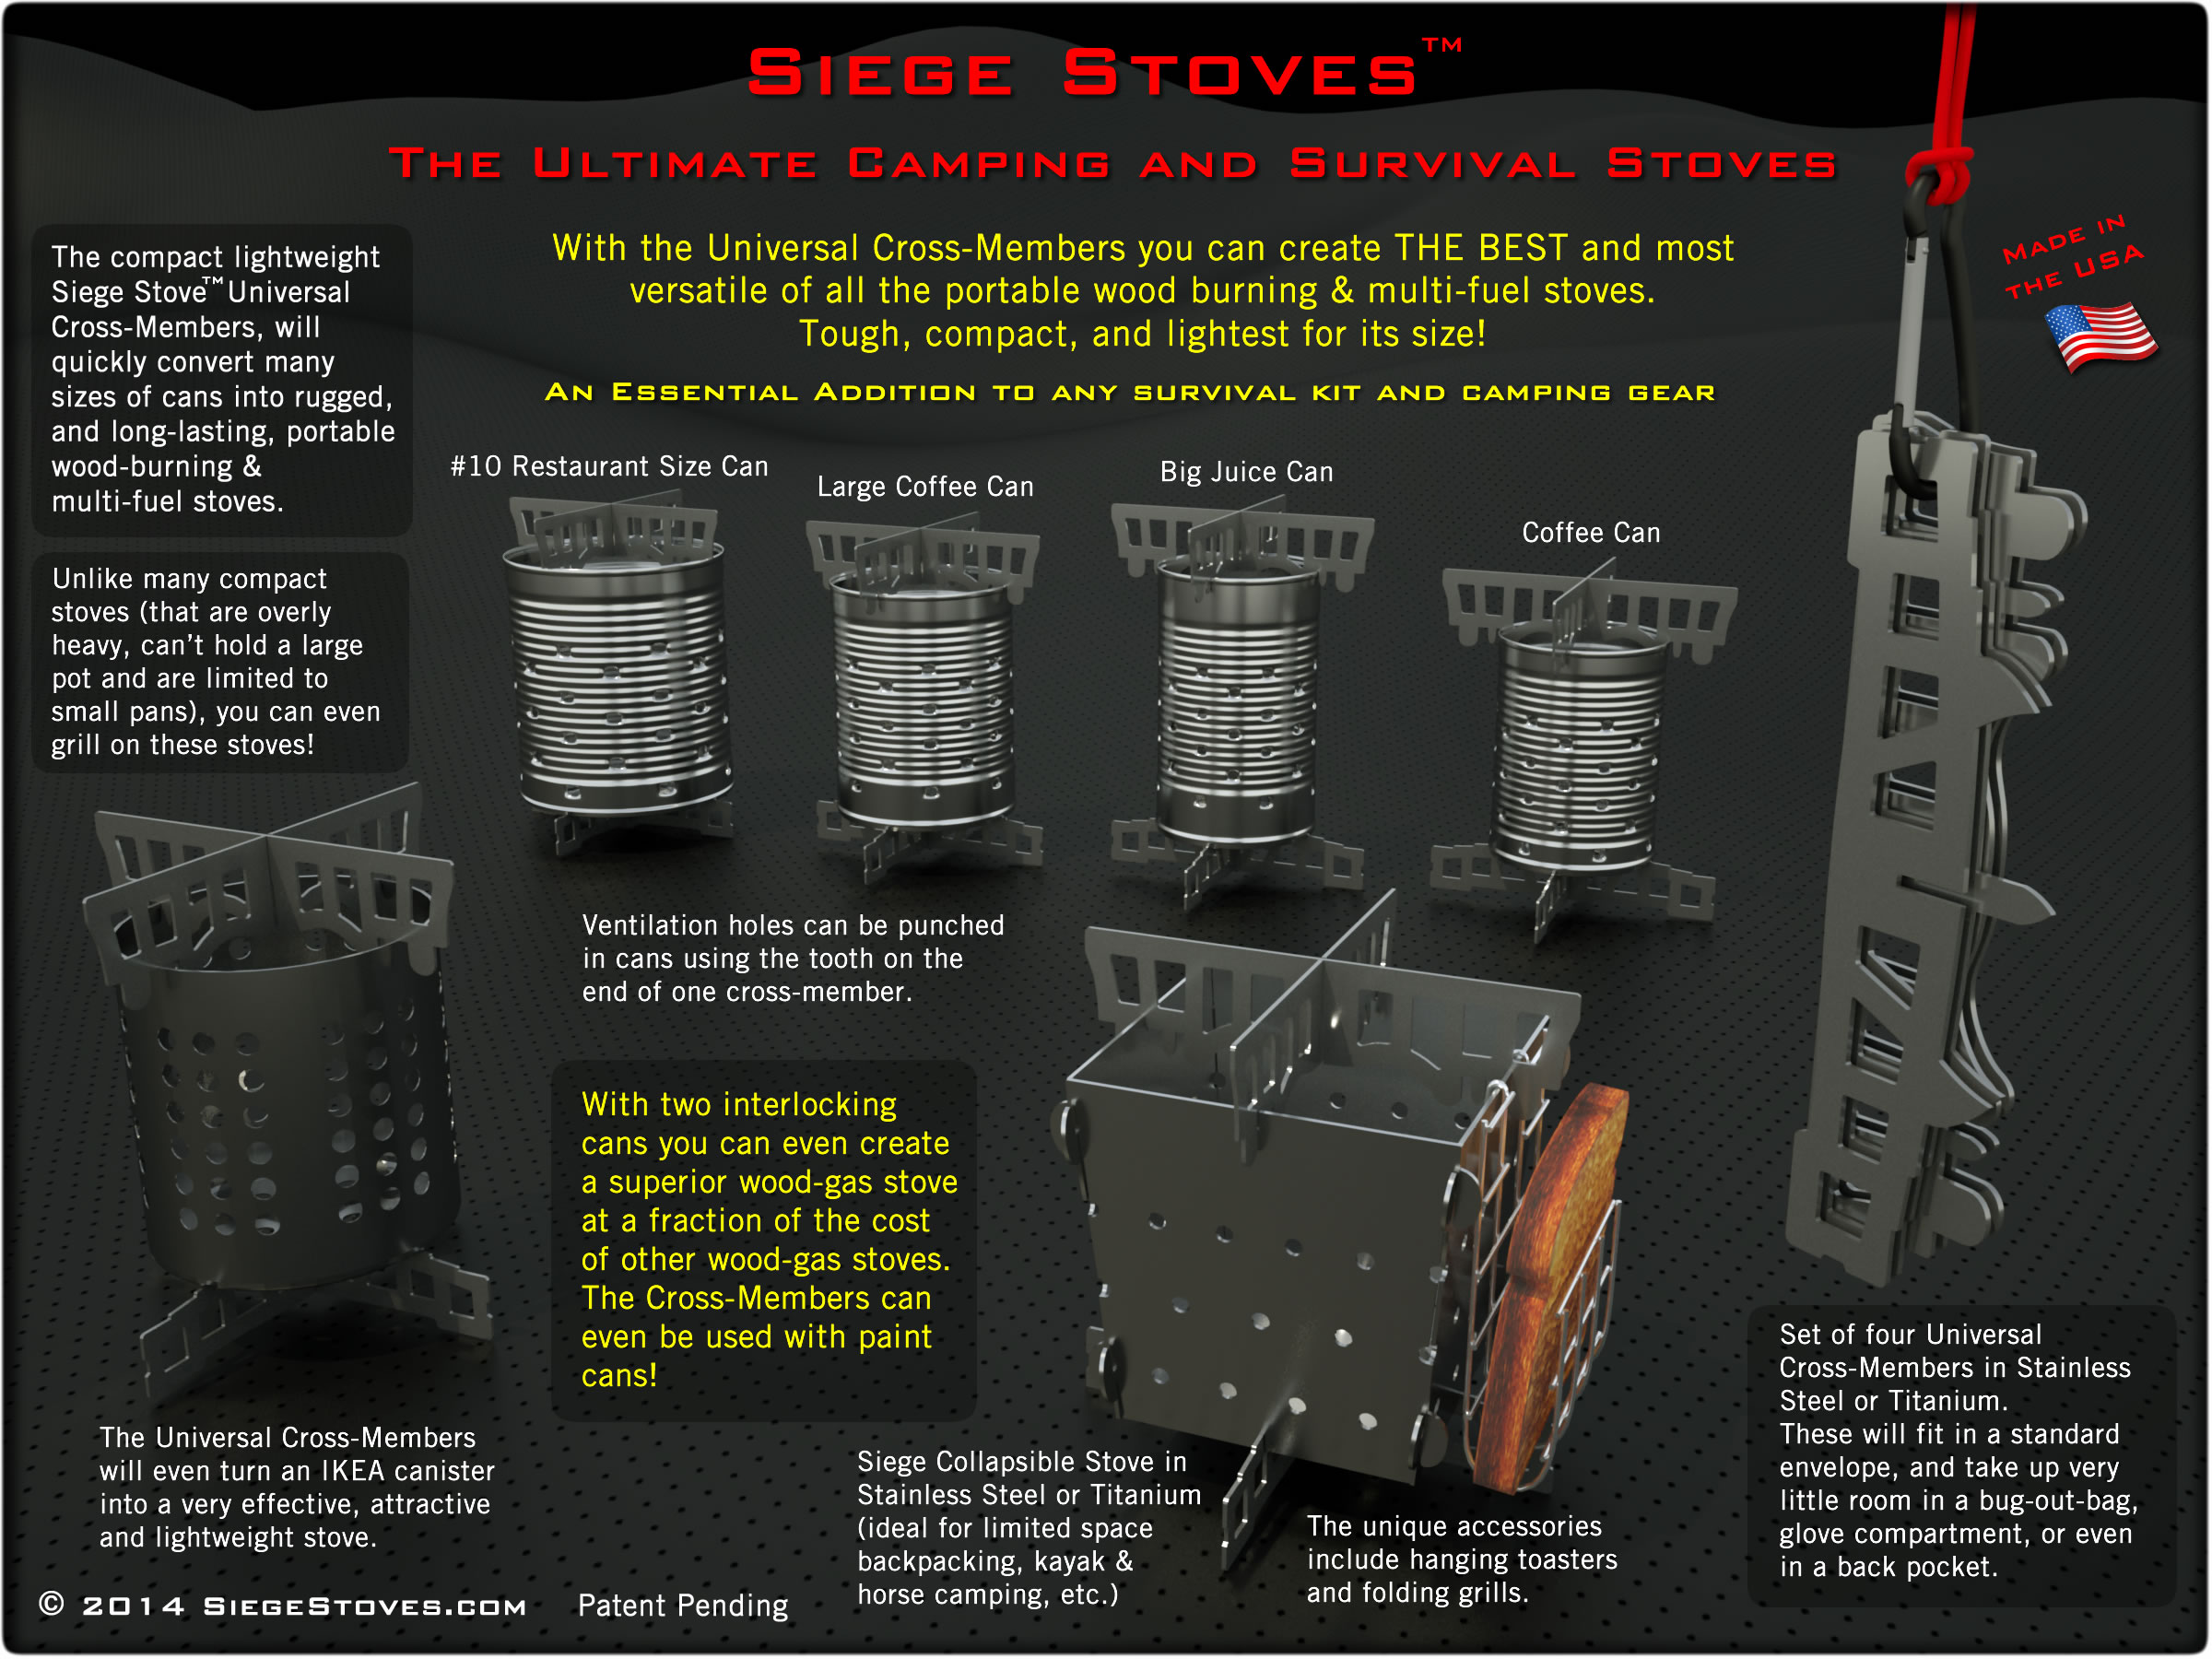 Create you own Ultimate Camping & Survival Stove!